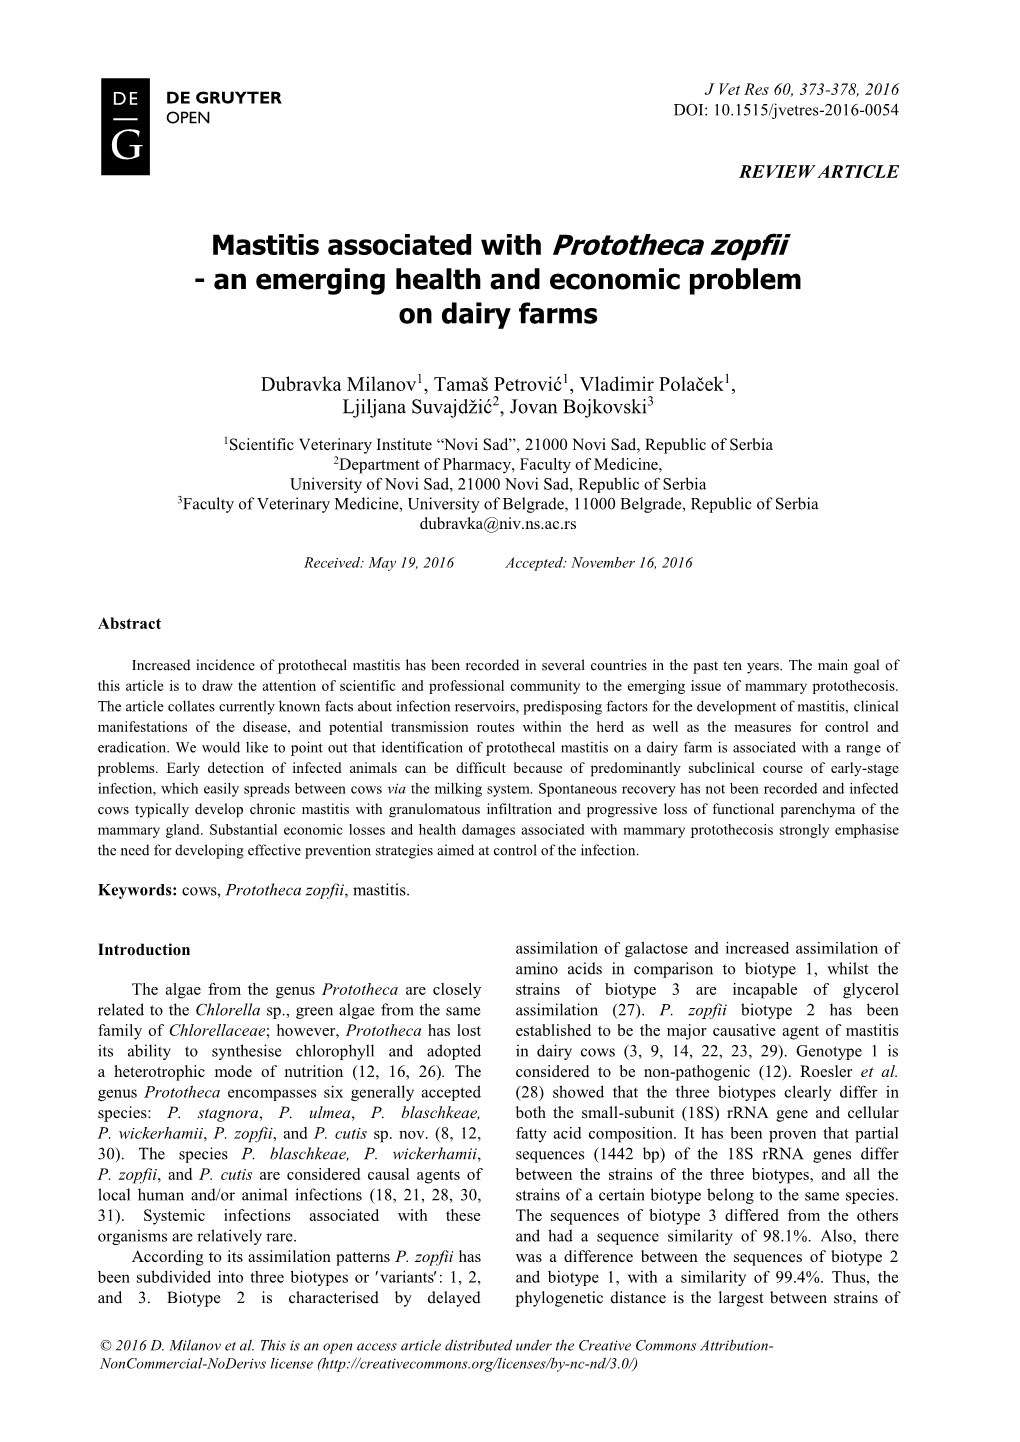 Mastitis Associated with Prototheca Zopfii - an Emerging Health and Economic Problem on Dairy Farms